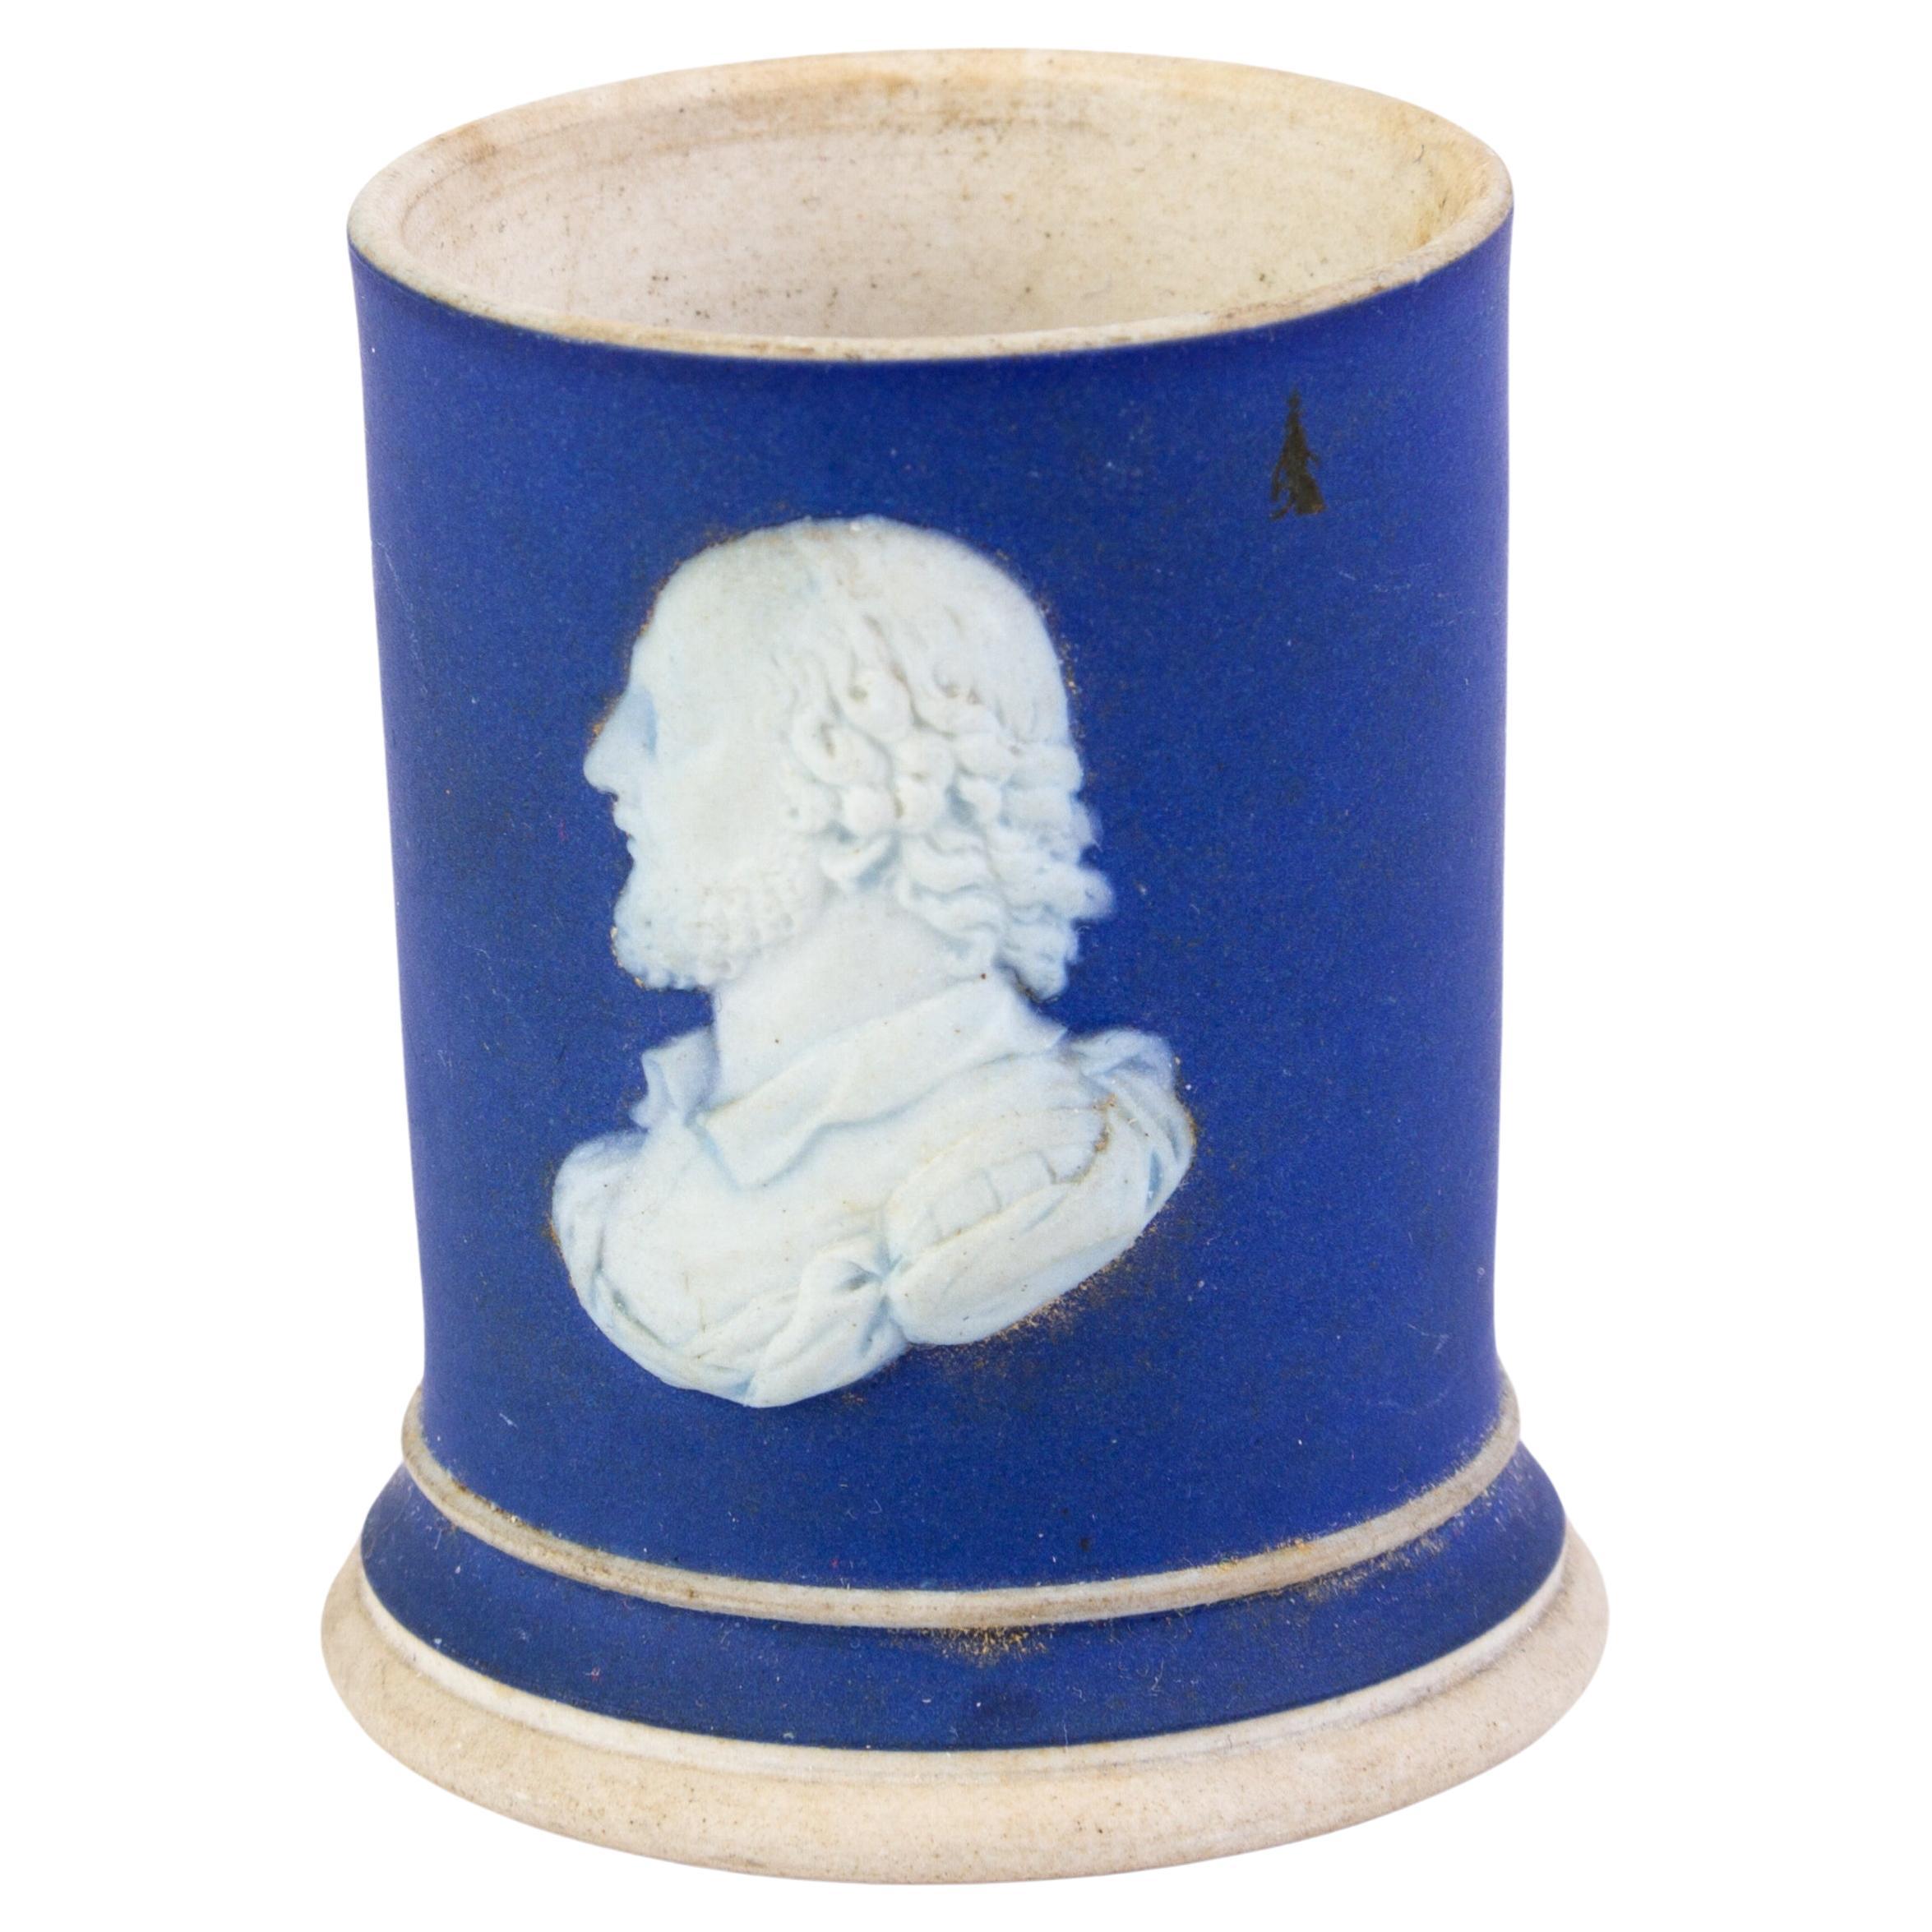 In good condition
From a private collection
Free international shipping
Wedgwood Portland Blue Jasperware Neoclassical Portrait Vase